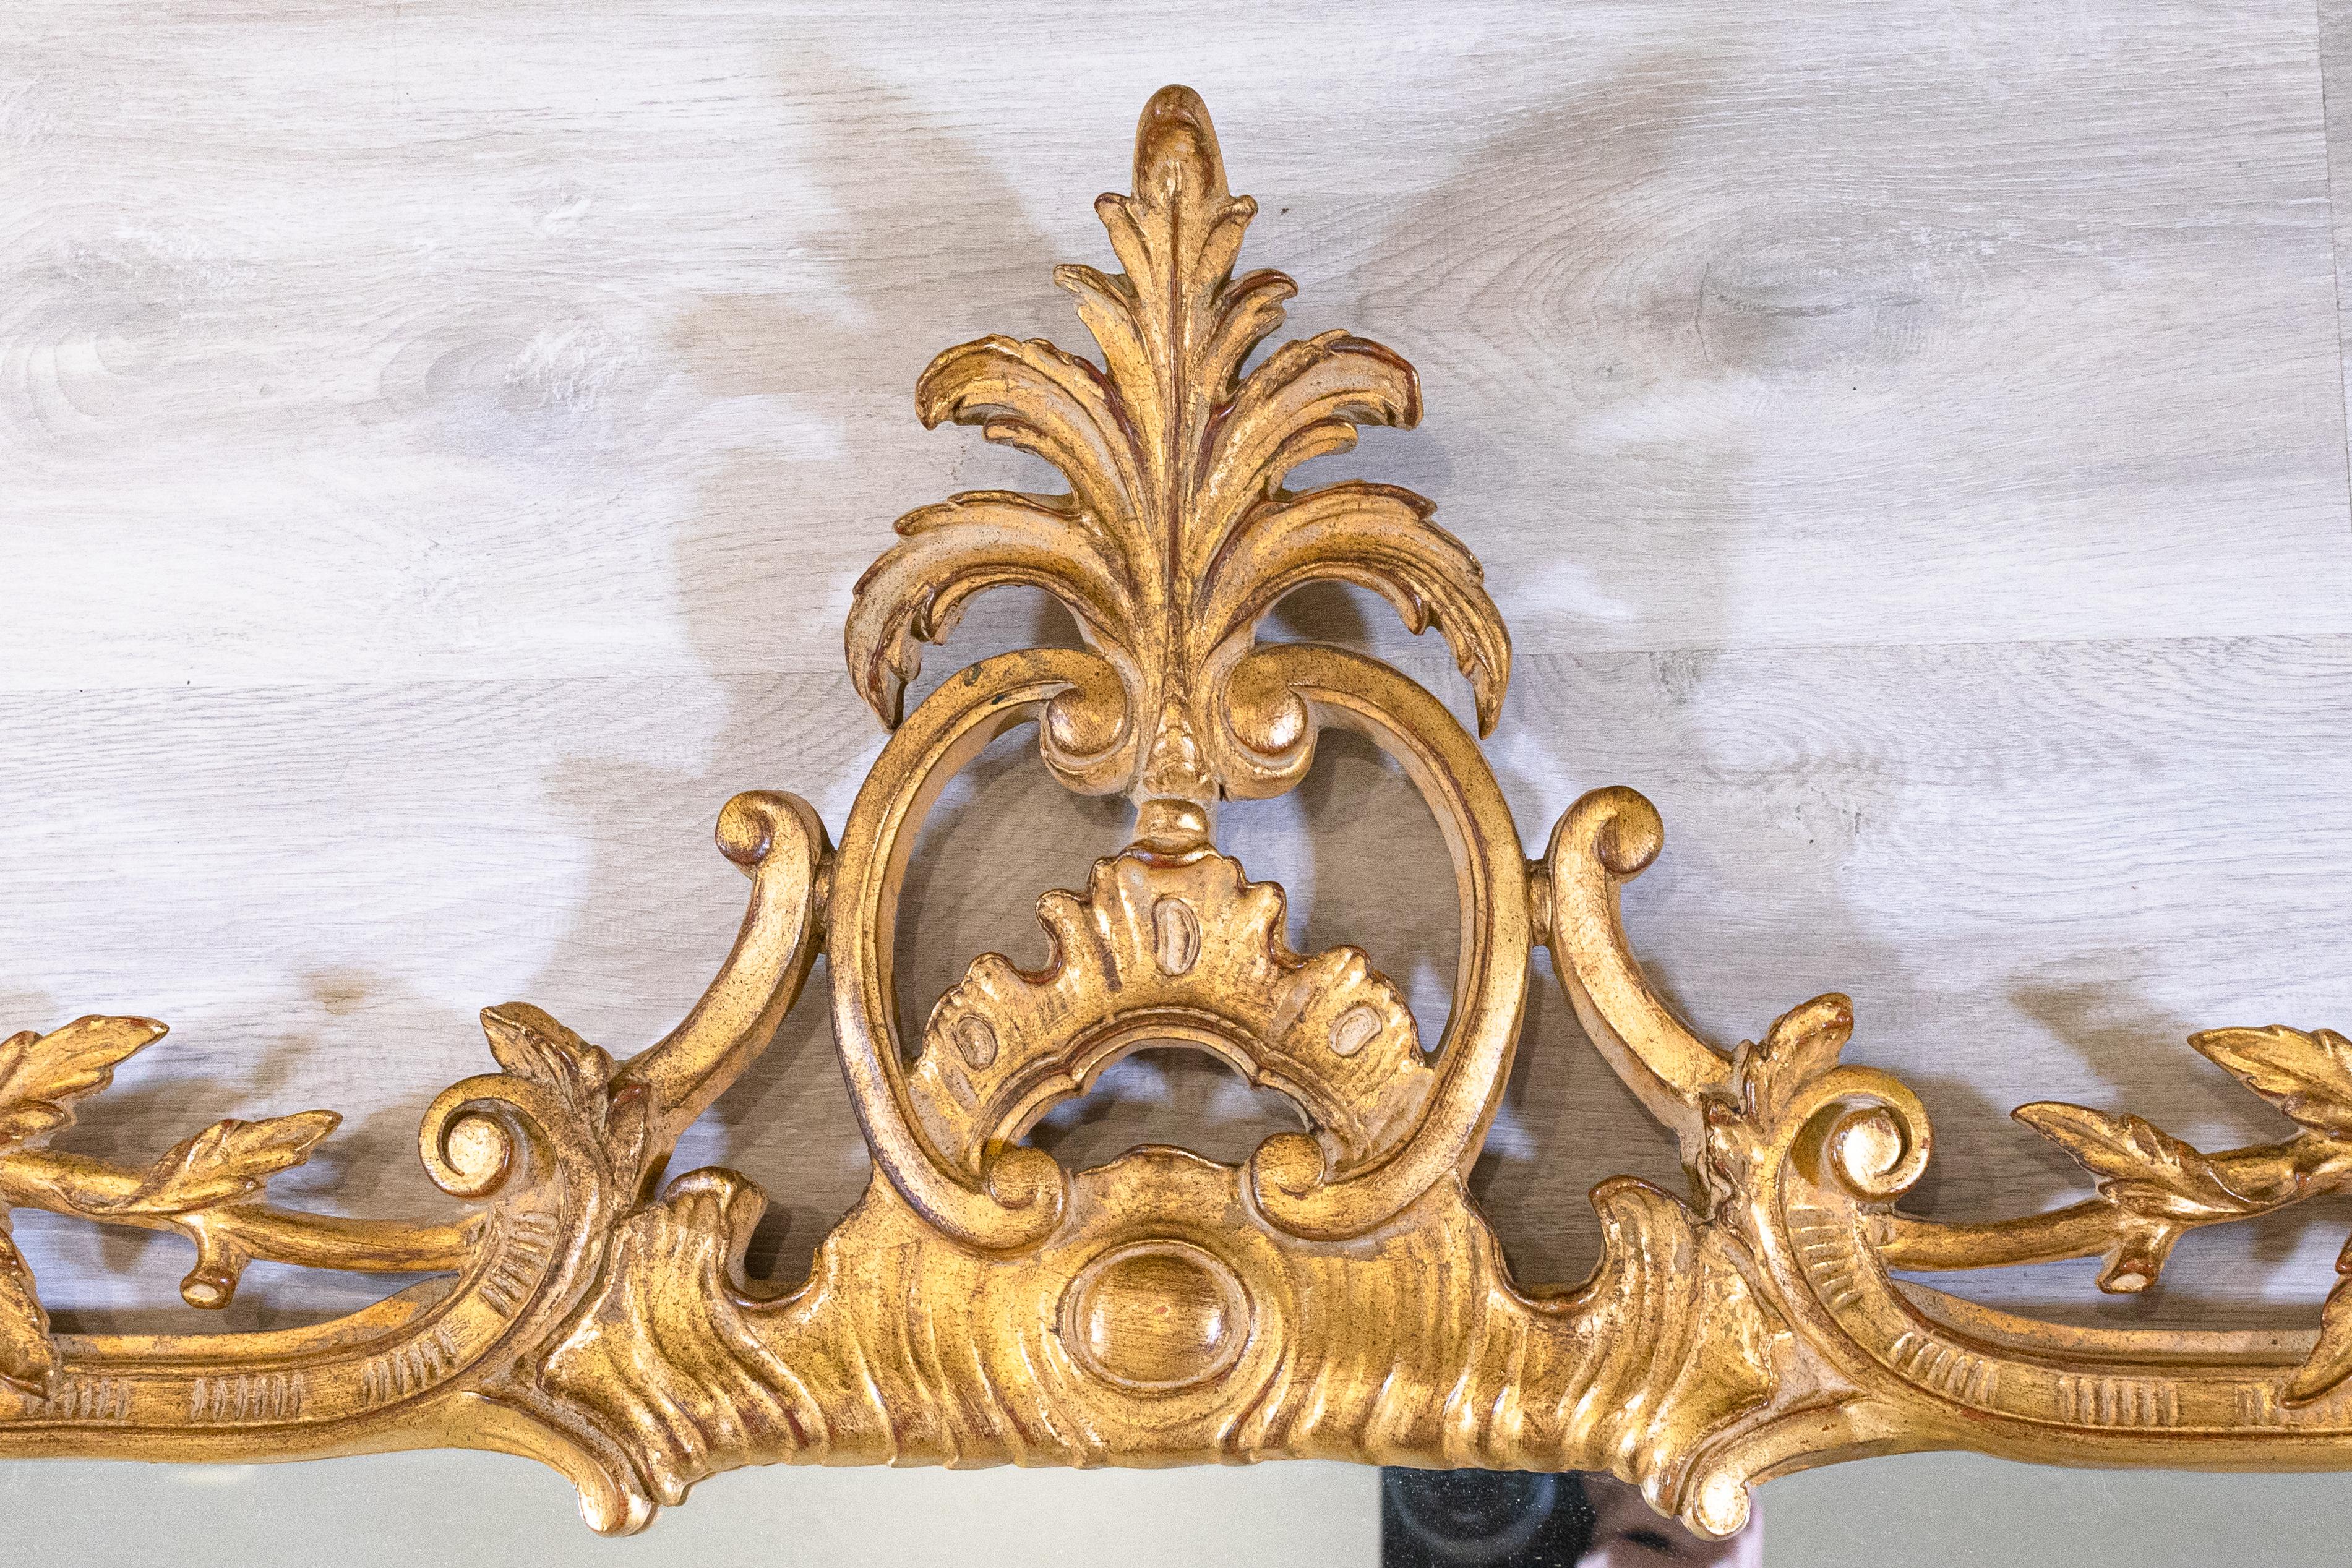 A grand antique style La Barge gold gilt chippendale style mirror. This horizontal mirror measures 46.25 in tall, 60 in wide, and 3.5 in thick. This mirror is very heavy and requires heavy duty wiring or screws with anchoring. This piece is in very